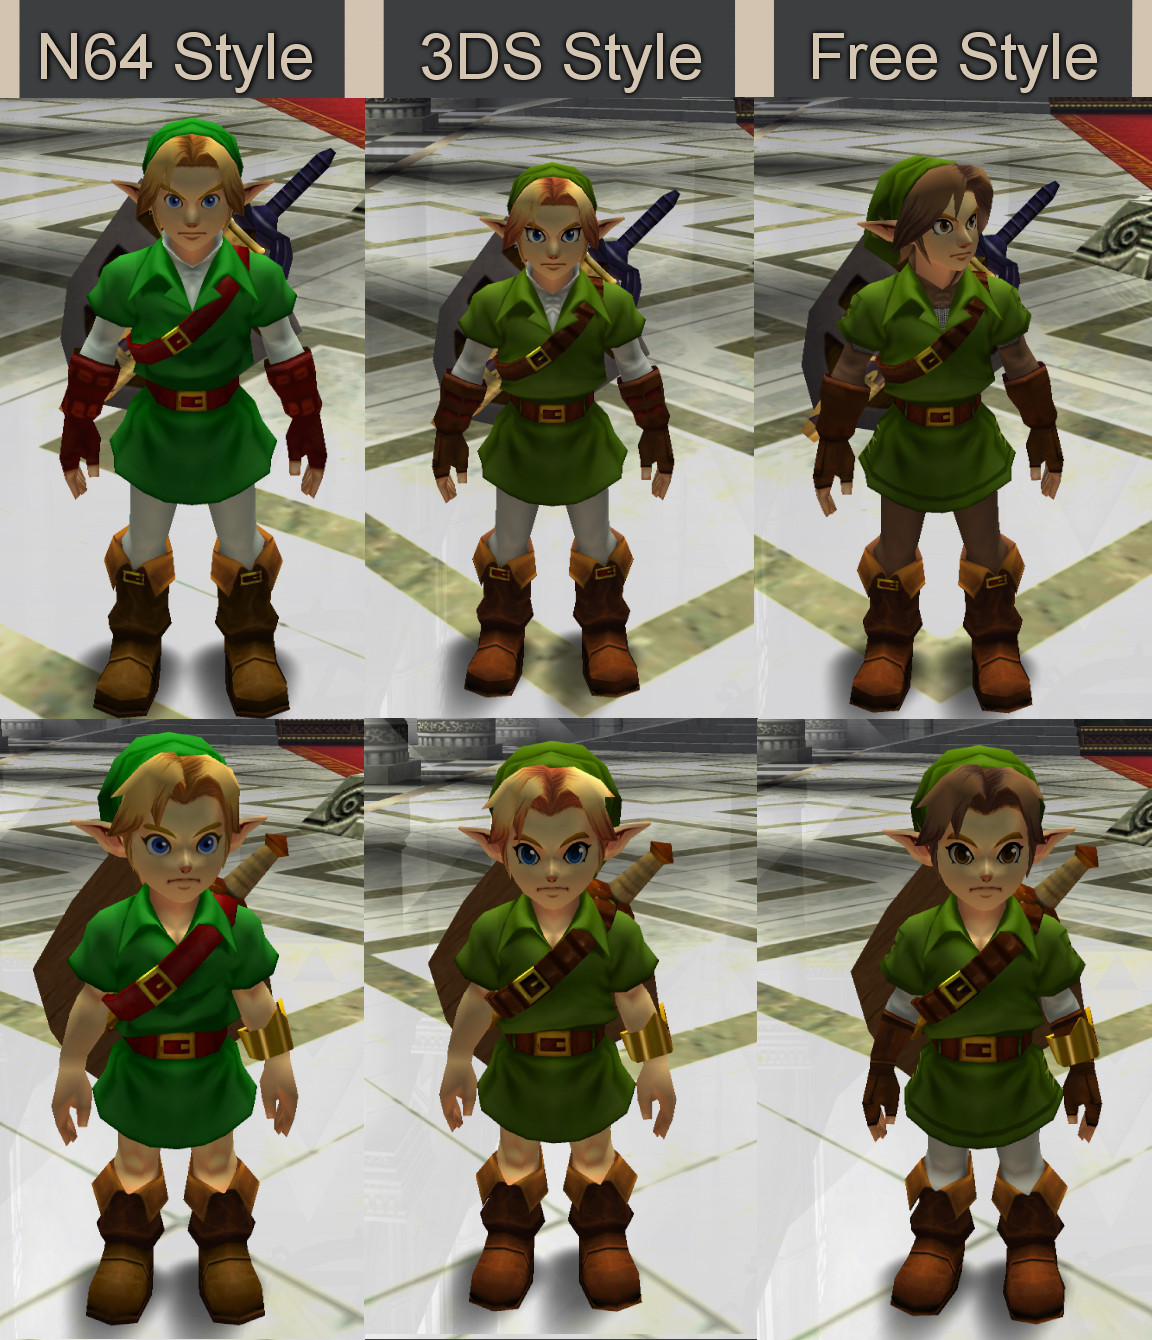 The Legend of Zelda Ocarina of Time for N64 Link and the 